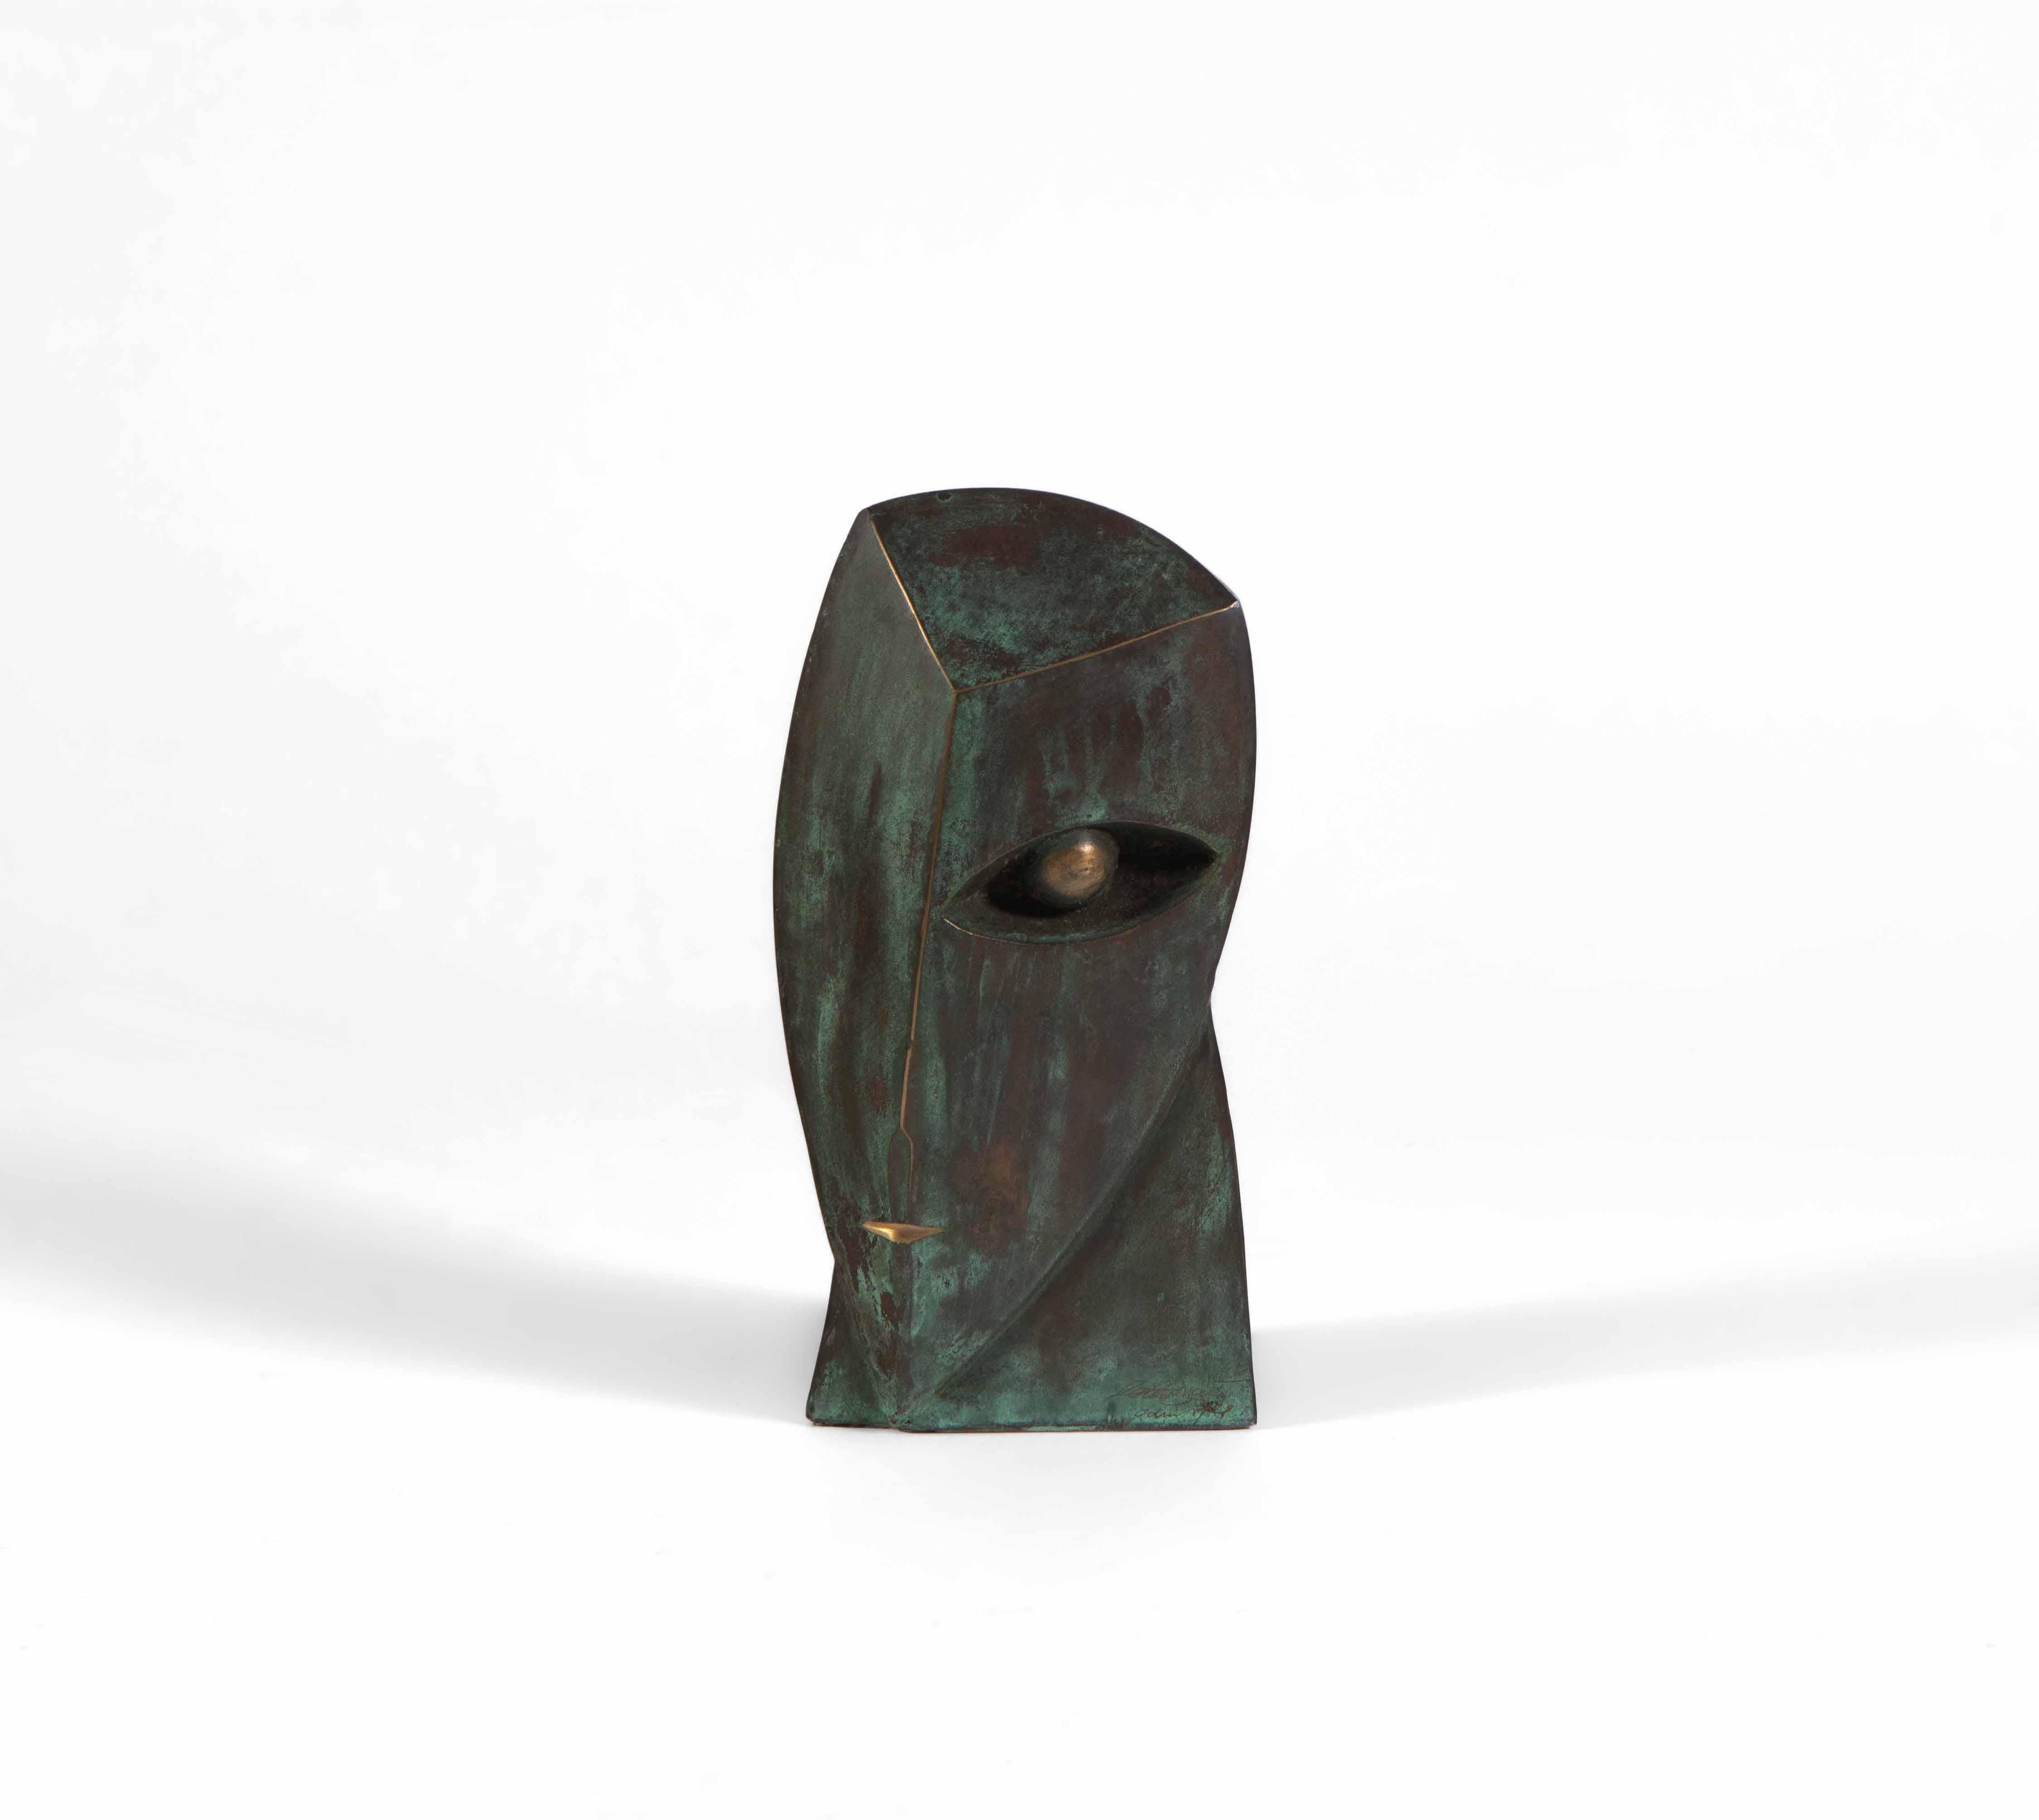 German Bronze Abstract Head By Lothar Maier “Odin” 7/29 For Sale